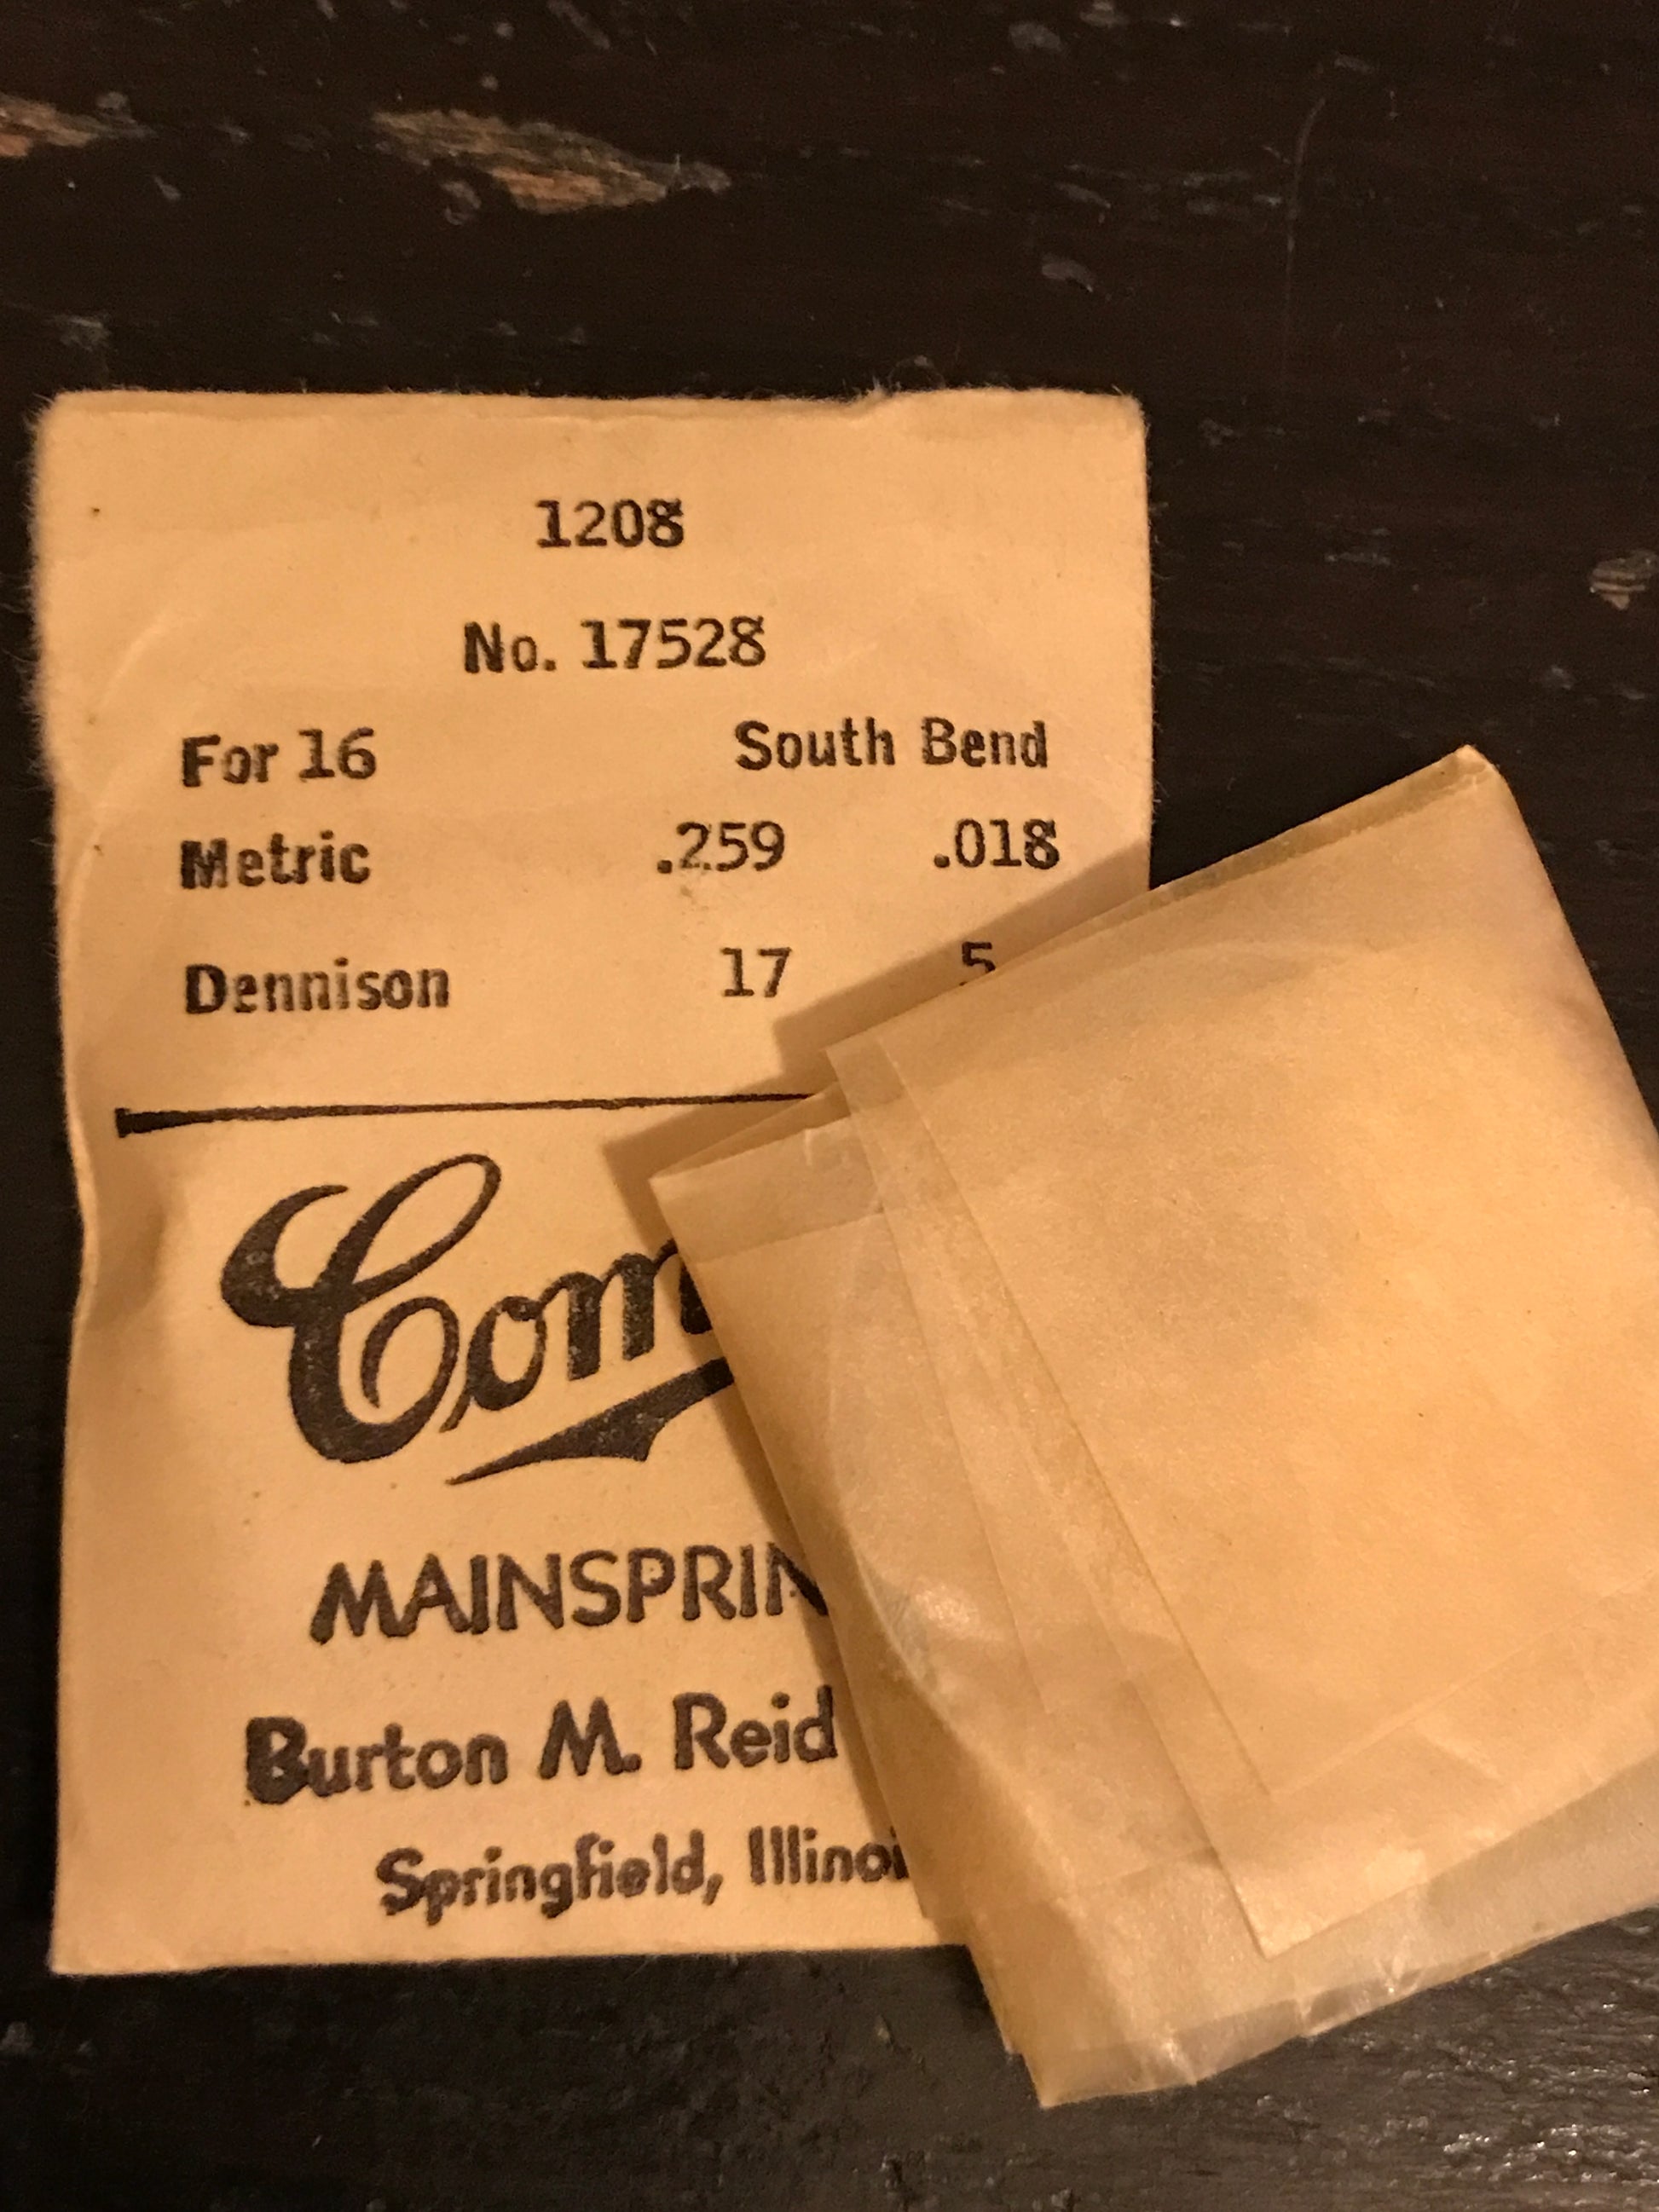 Comsco Mainspring #1208 for 16s South Bend Factory No. 17528 - Steel